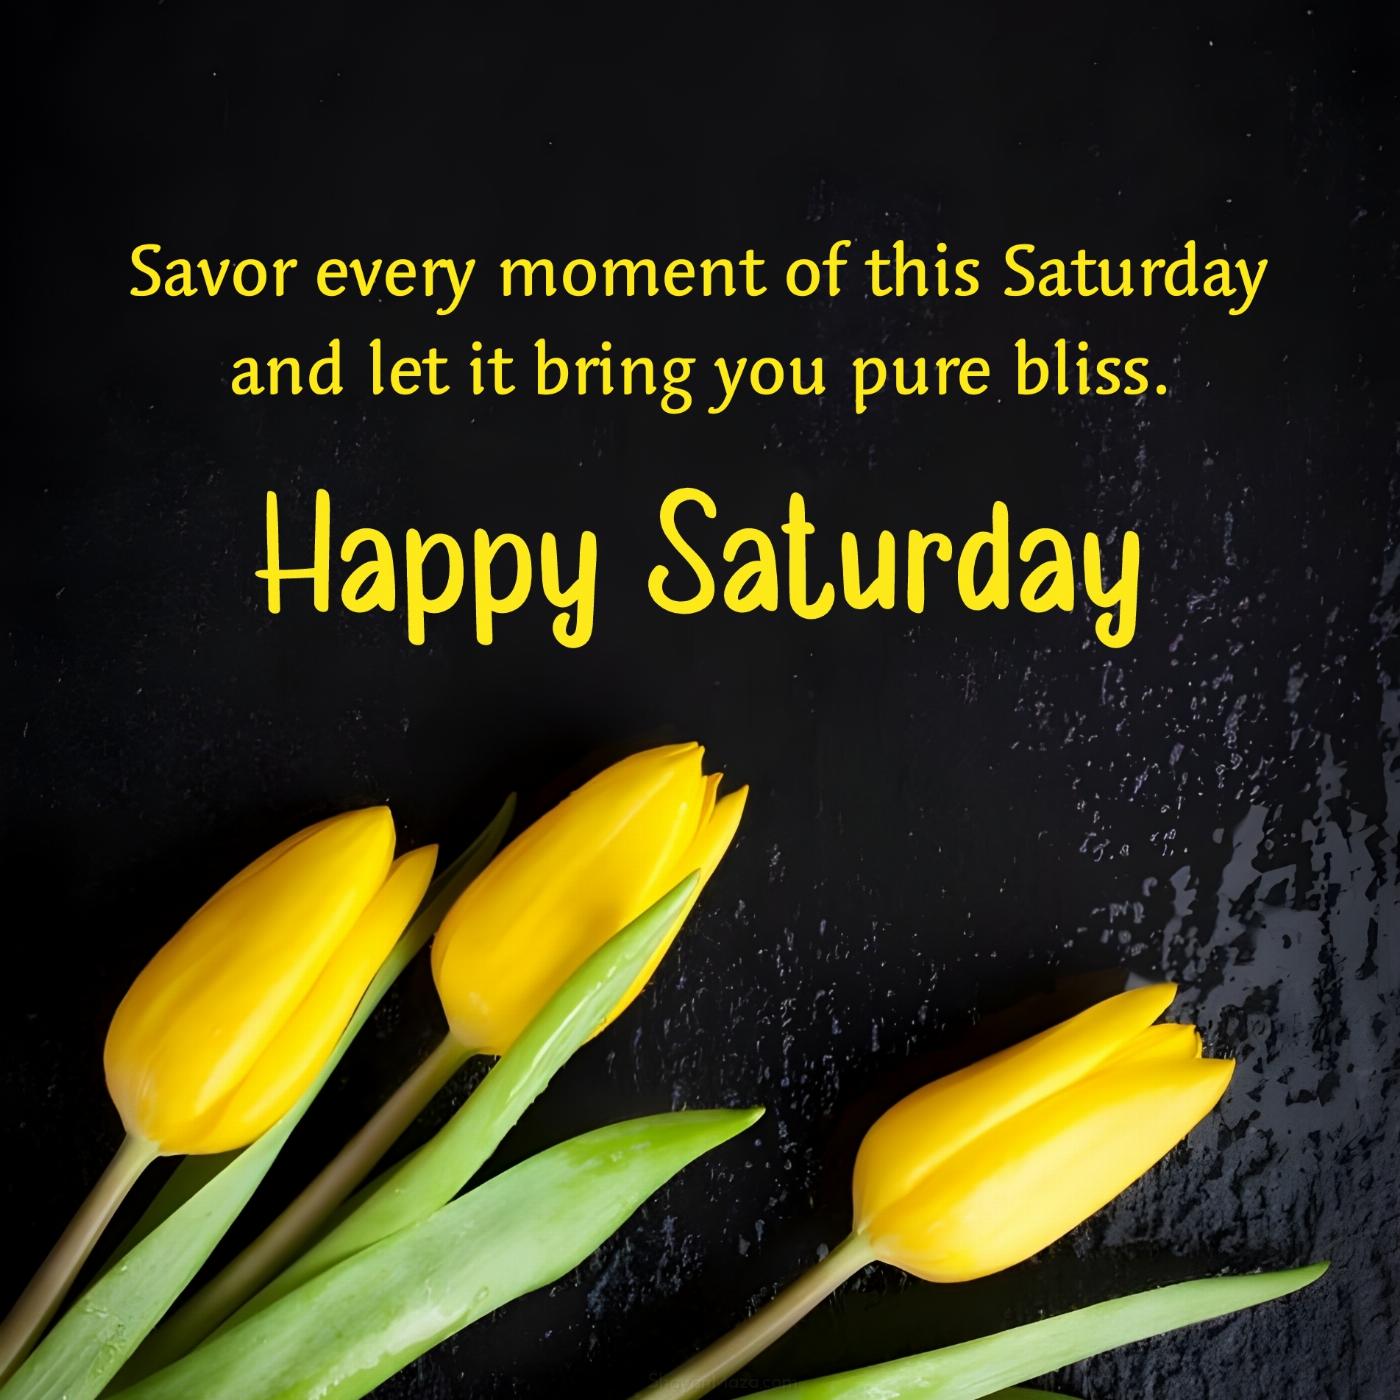 Savor every moment of this Saturday and let it bring